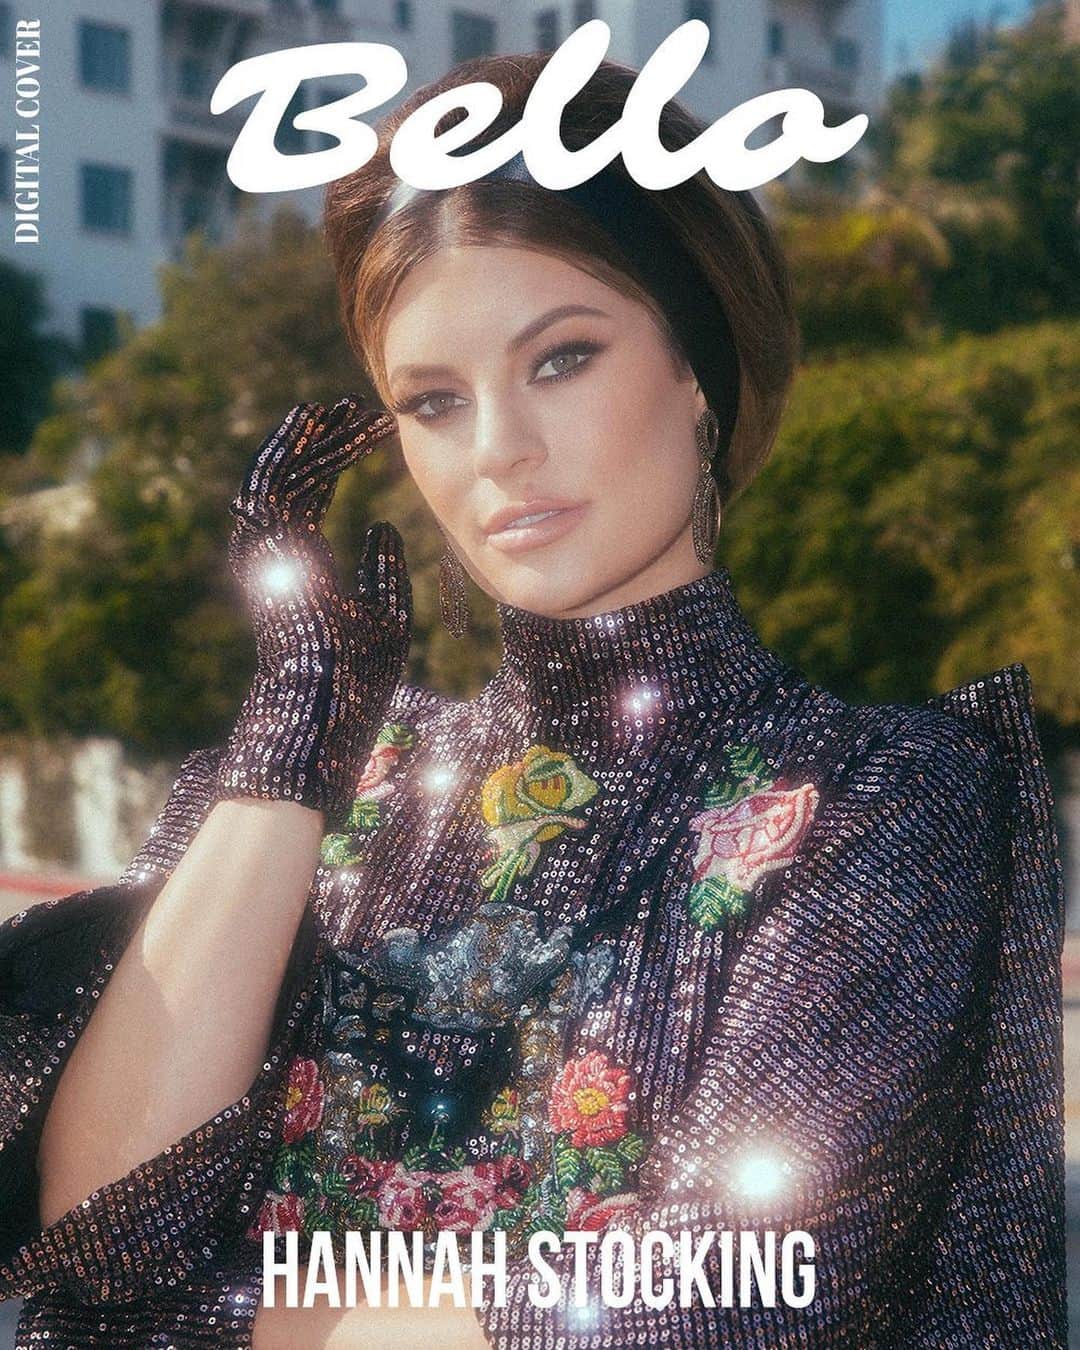 Hannah Stockingのインスタグラム：「WOWIE! Thank you @bellomag for this INCREDIBLE cover 🥰🌷 this is a dream come true! ✨🌸 photography: @dylanperlot creative direction: @alekandsteph styling: @stylelvr hair: @hairbyruslan hair assistant: @reaganlinkartistry makeup: @sarahnelsonmakeup interview by: @alexbonnetwrites Hannah assistant: @_shmian」